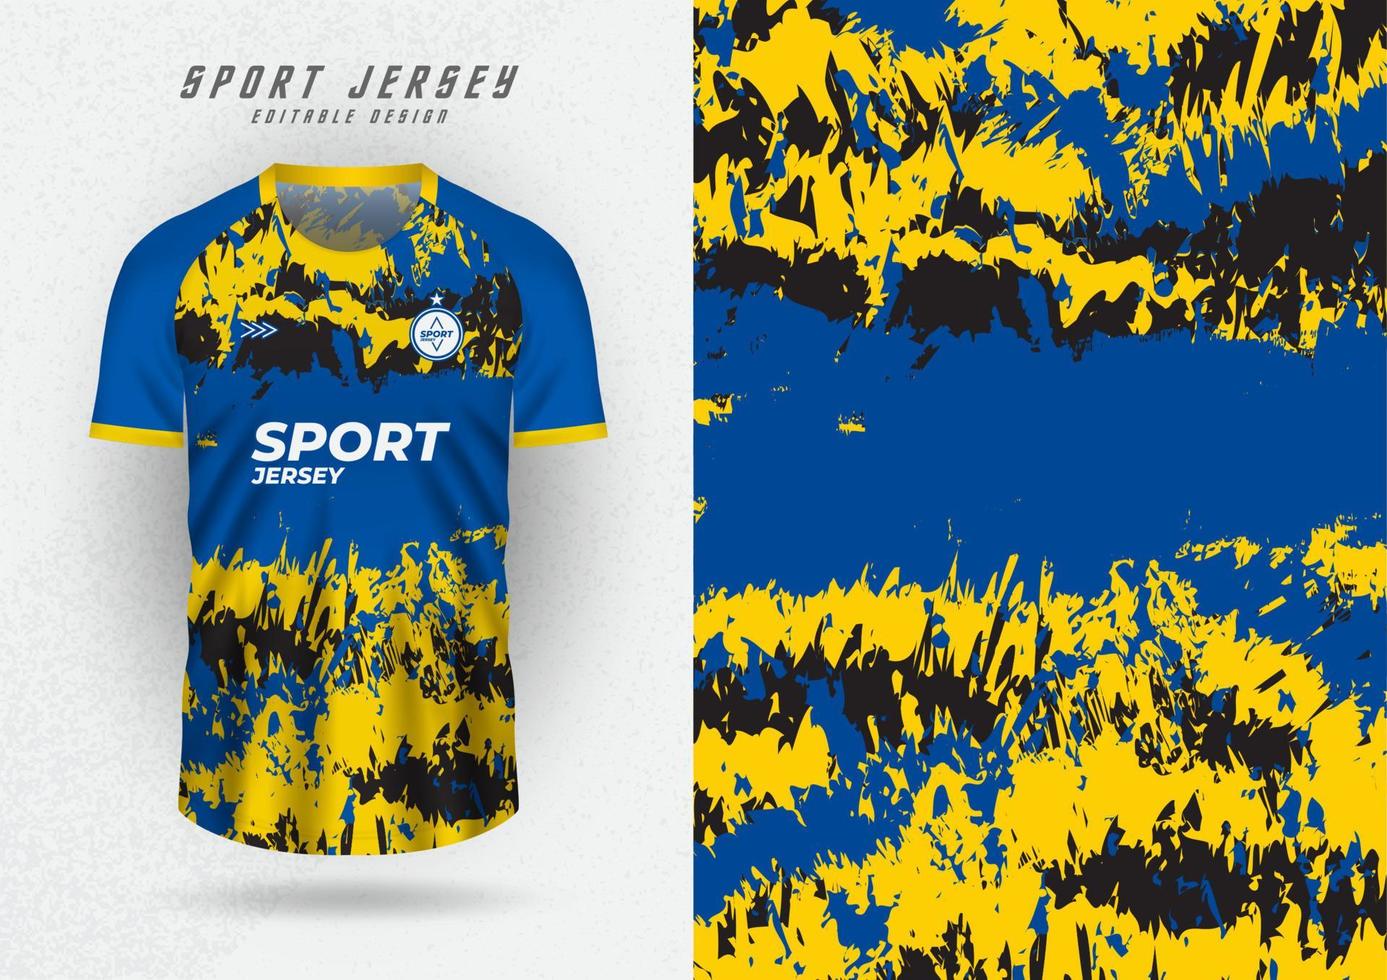 Background mockup for sports jerseys, jerseys, running shirts, Yellow black grunge pattern and blue central stripe. vector